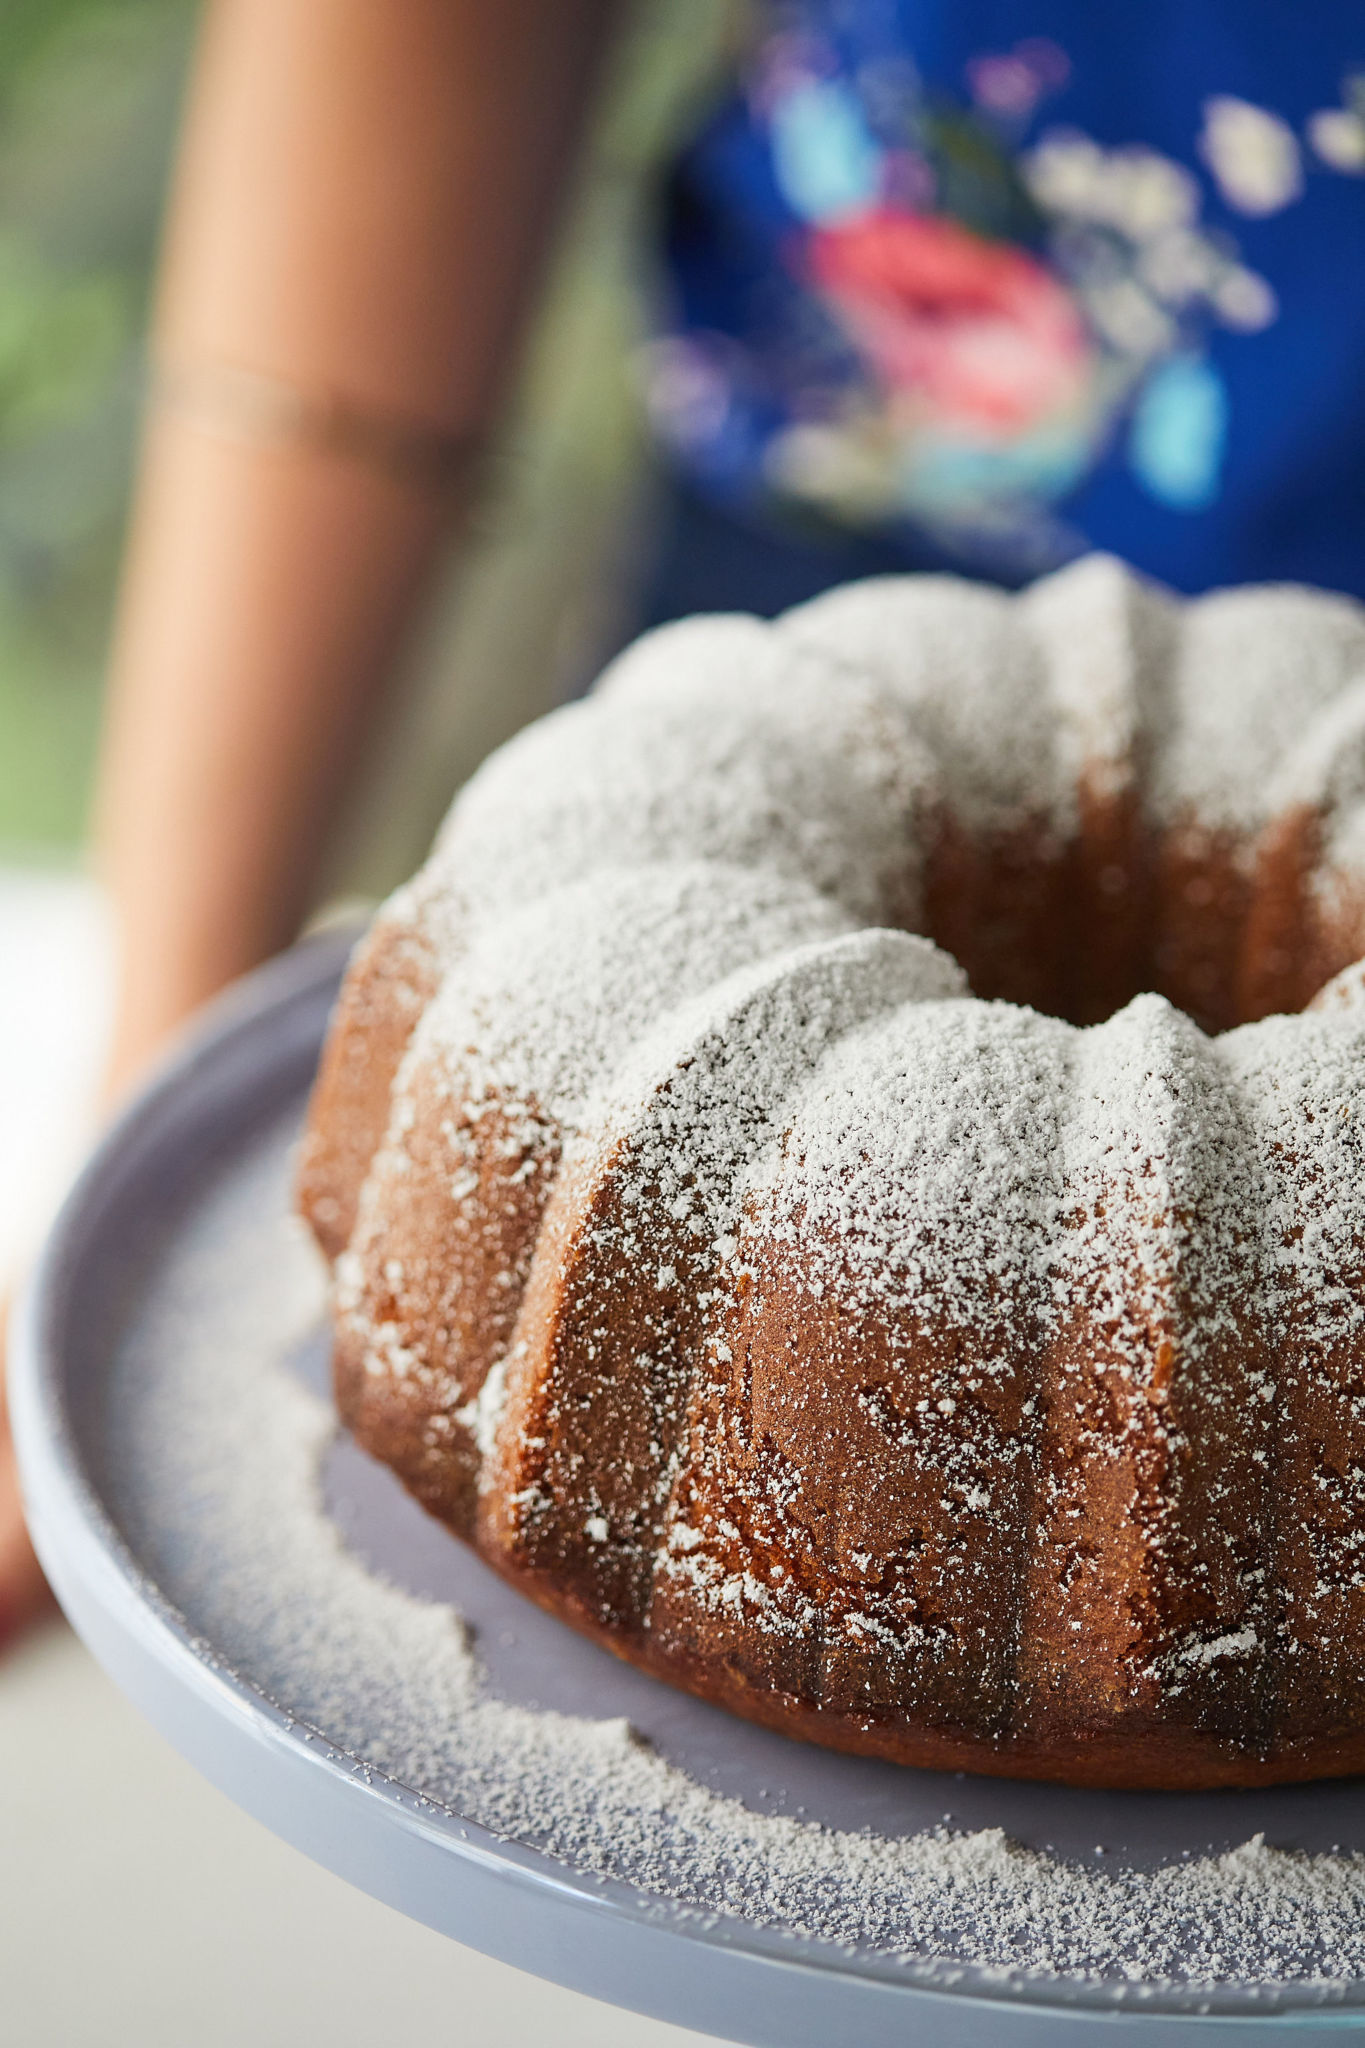 My Olive Oil Cake dusted in powdered sugar.